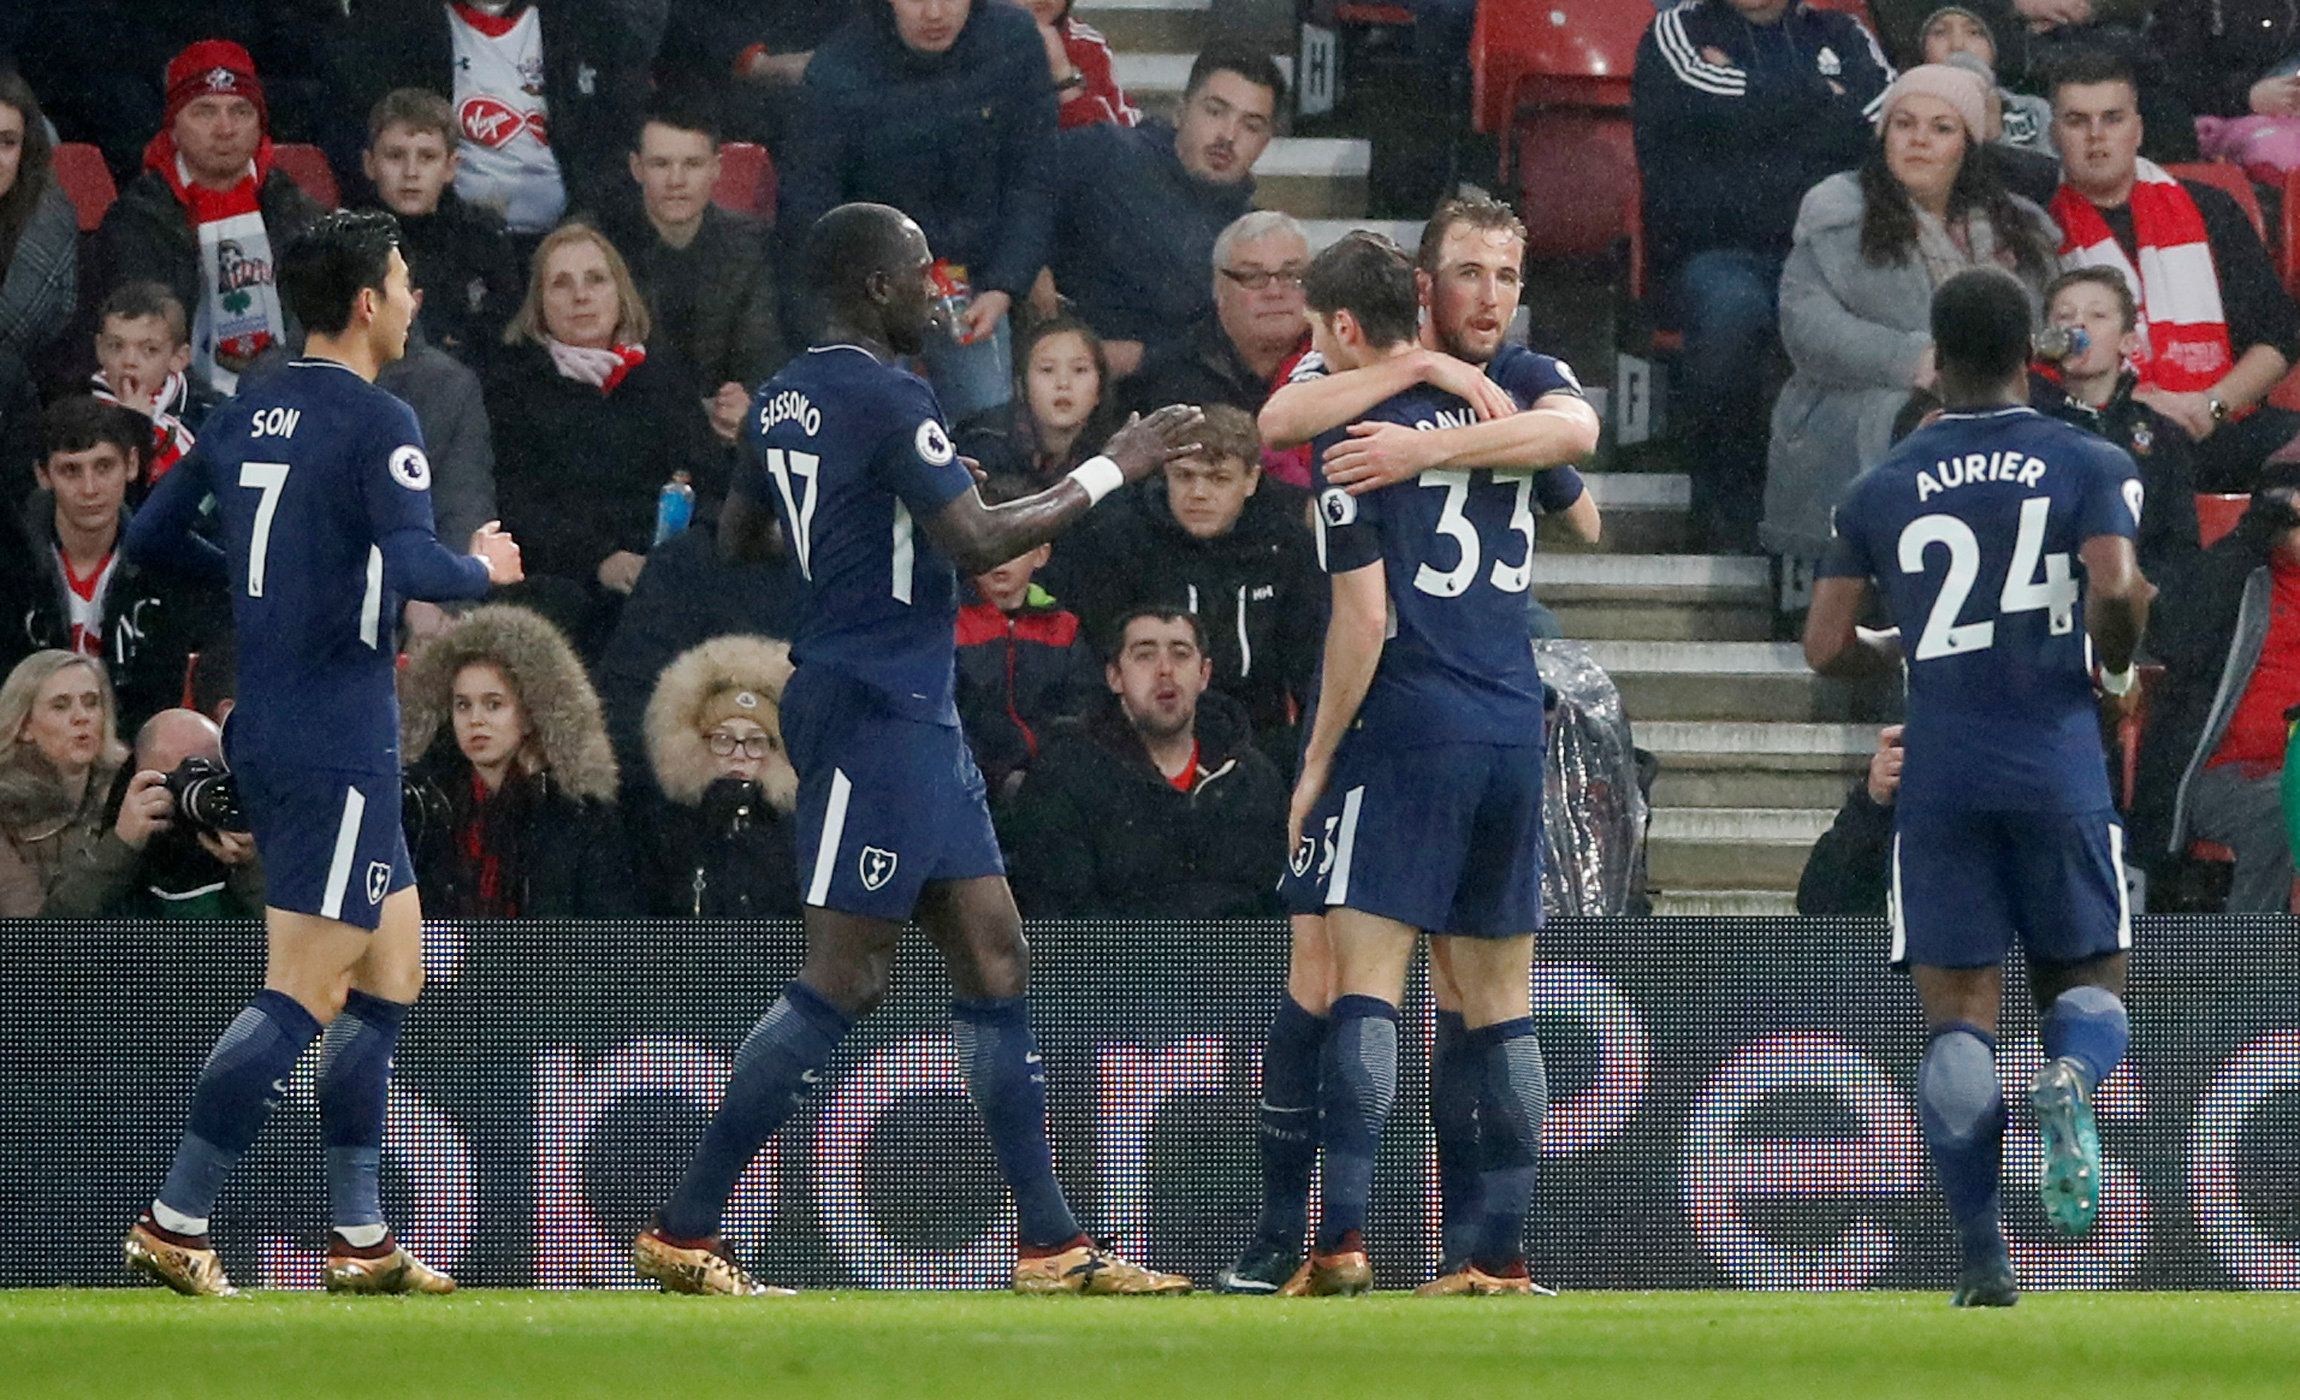 Soccer Football - Premier League - Southampton vs Tottenham Hotspur - St Mary's Stadium, Southampton, Britain - January 21, 2018   Tottenham's Harry Kane celebrates scoring their first goal with team mates         REUTERS/David Klein    EDITORIAL USE ONLY. No use with unauthorized audio, video, data, fixture lists, club/league logos or 